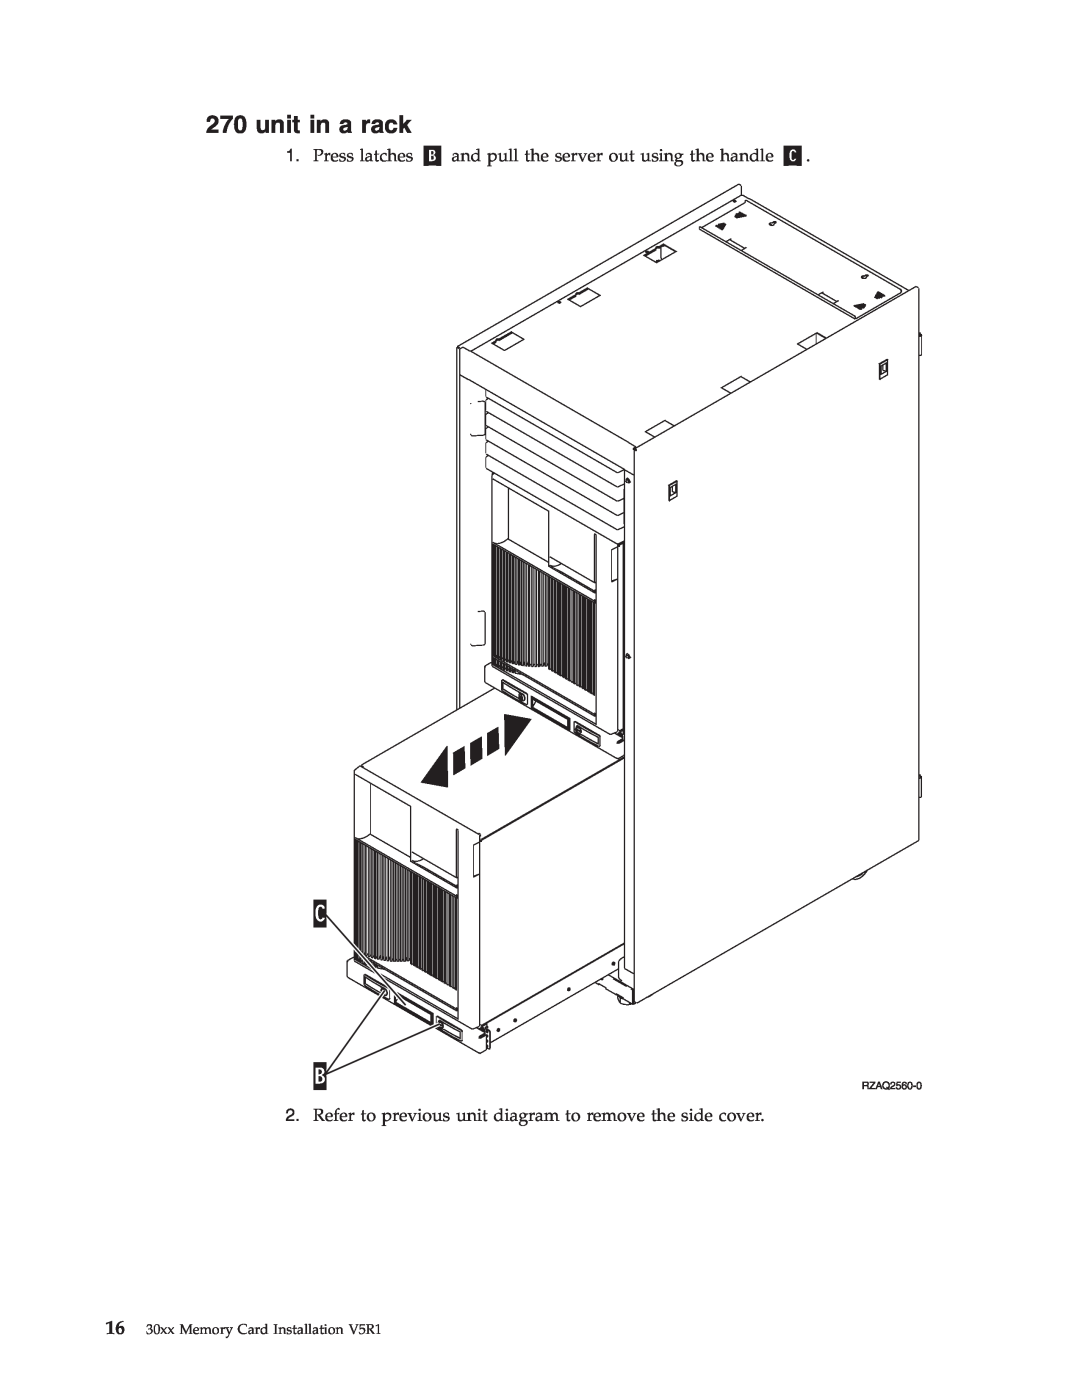 IBM SENG-3002-01 manual unit in a rack, Press latches, and pull the server out using the handle 